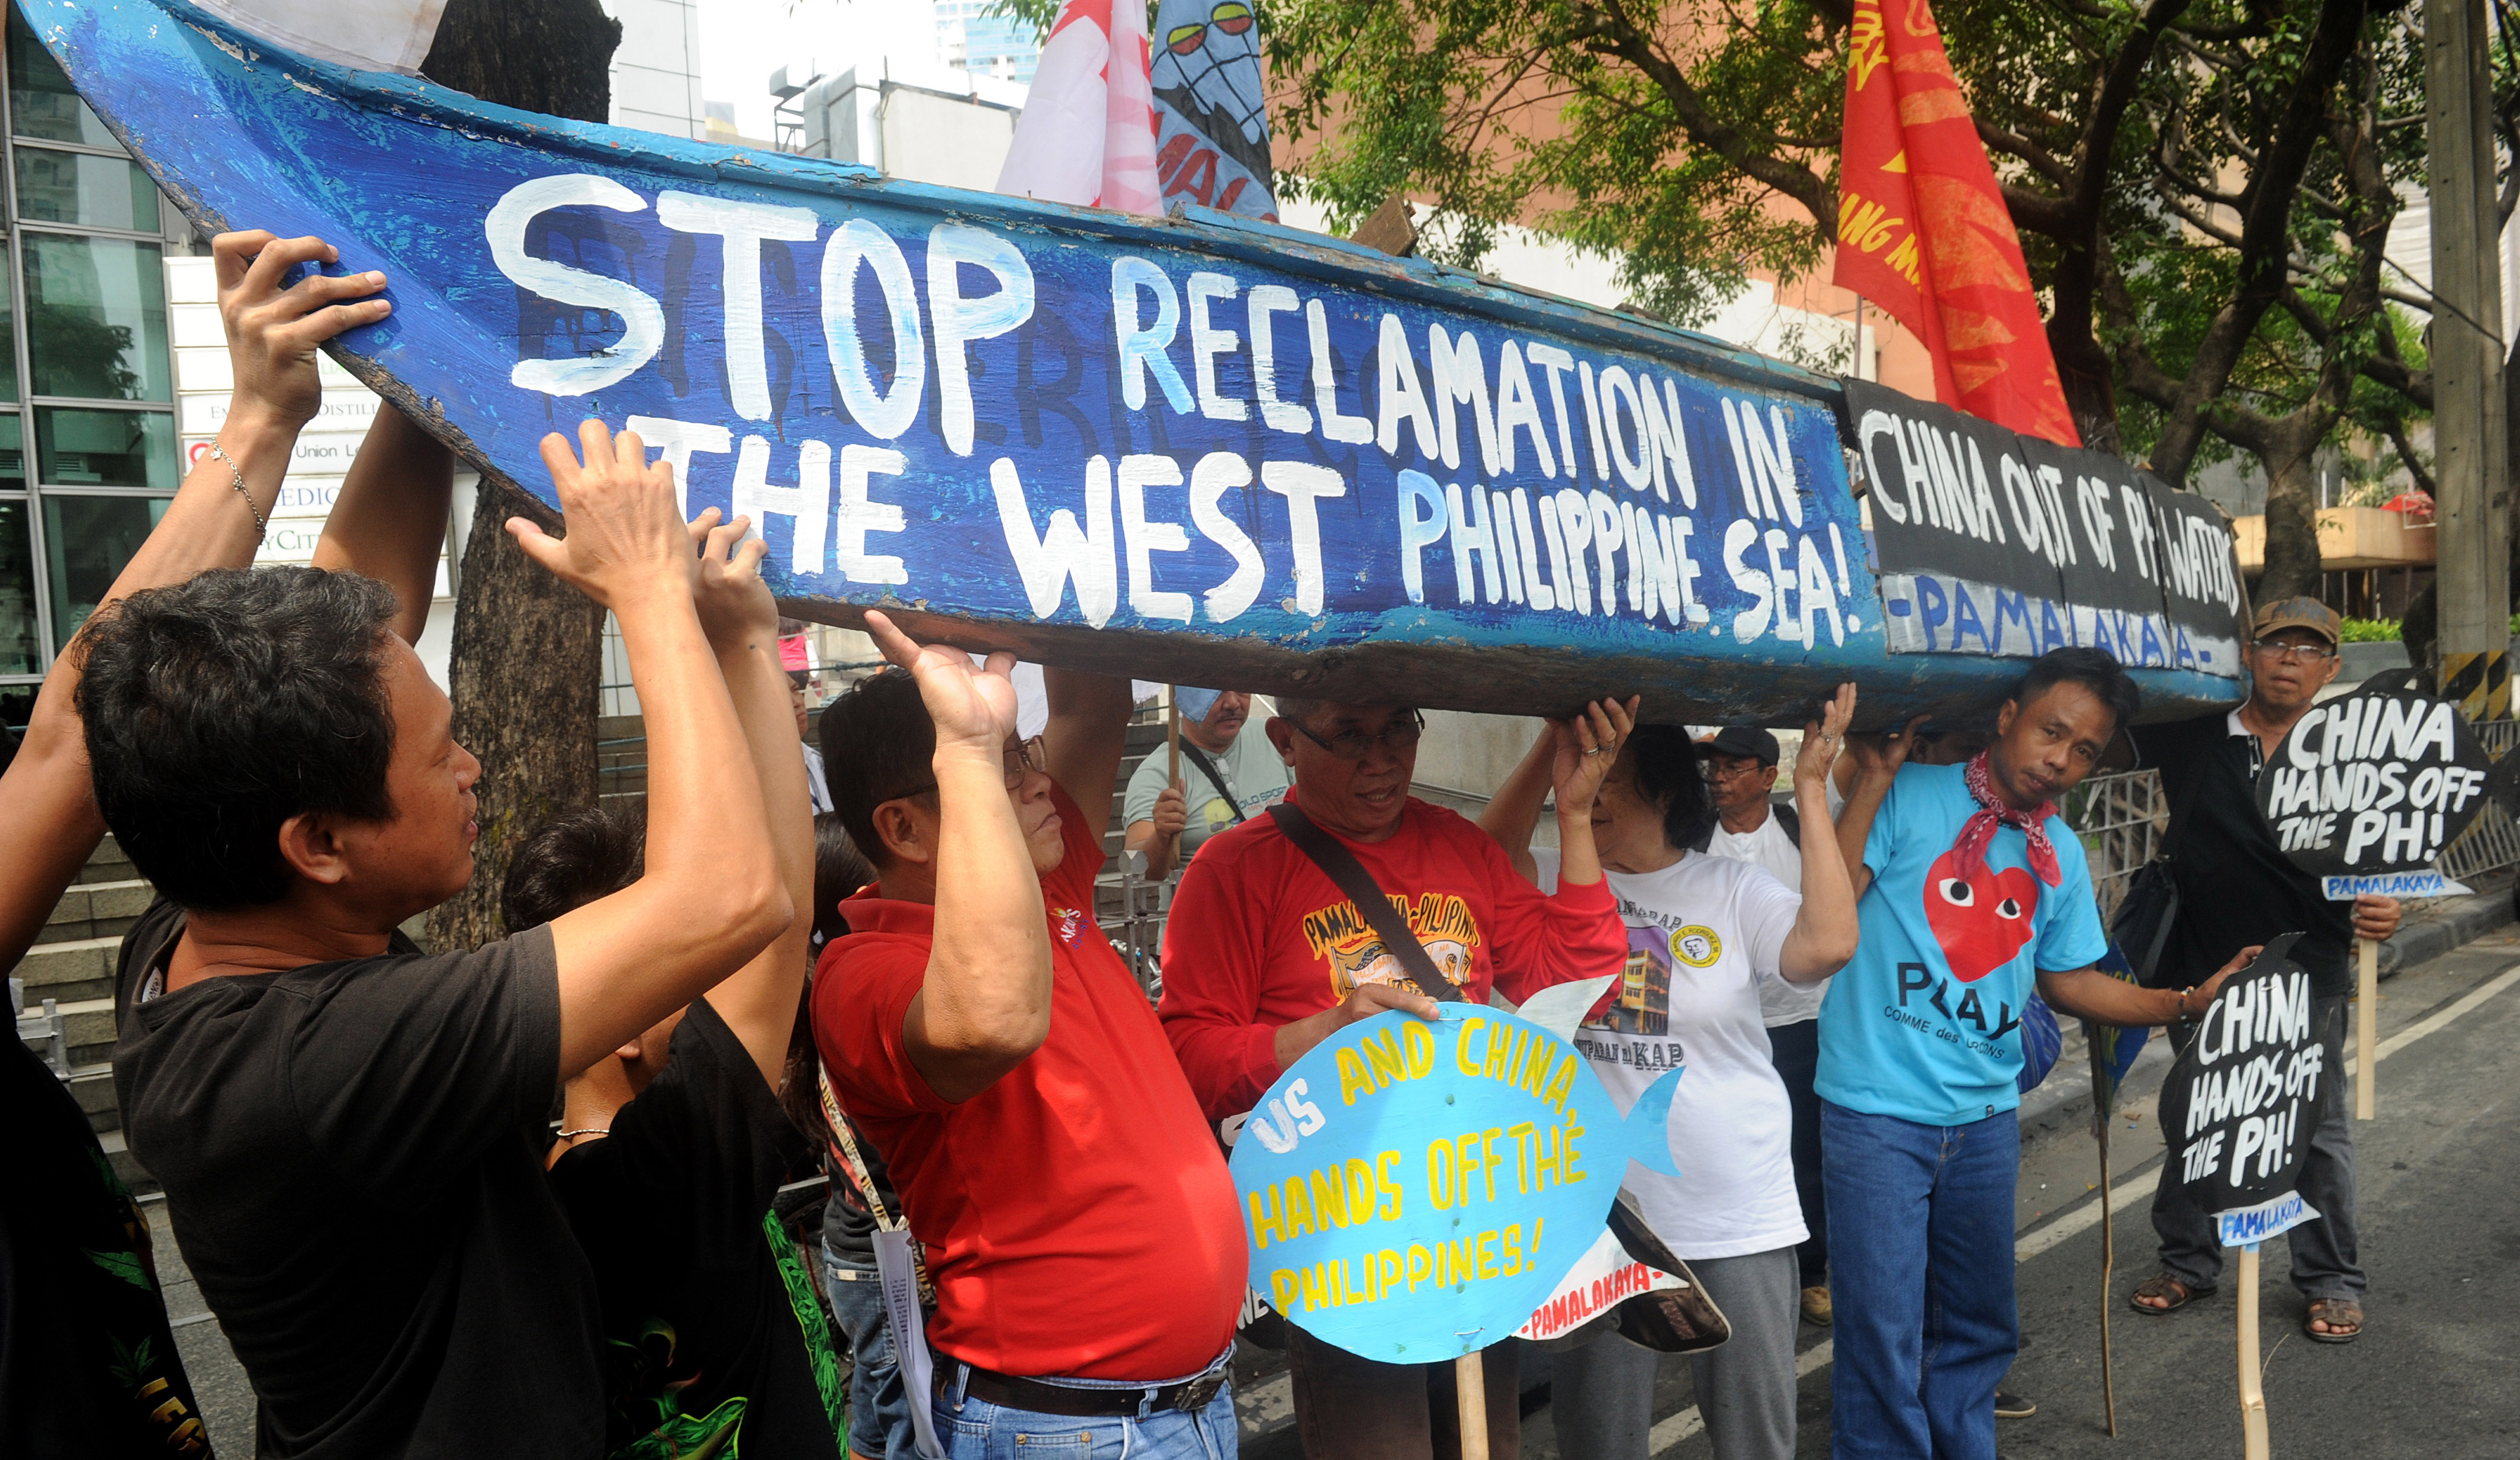 Activists hold a rally in front of the Chinese consulate in Manila's financial district on July 3, 2015 to protest China's reclamation works in the South China Sea, which the protesters have displaced Filipino fishermen. The Philippines has halted the repair of its airstrip in the disputed Spratly islands due to its pending suit at The Hague challenging China's claim over the waters, a presidential spokesman said on June 28.  Hearings at The Hague -- looking at whether Manila's complaint has legal merit as well as whether the court has jurisdiction over the case -- are set to begin next week.     AFP PHOTO / Jay DIRECTO / AFP PHOTO / JAY DIRECTO